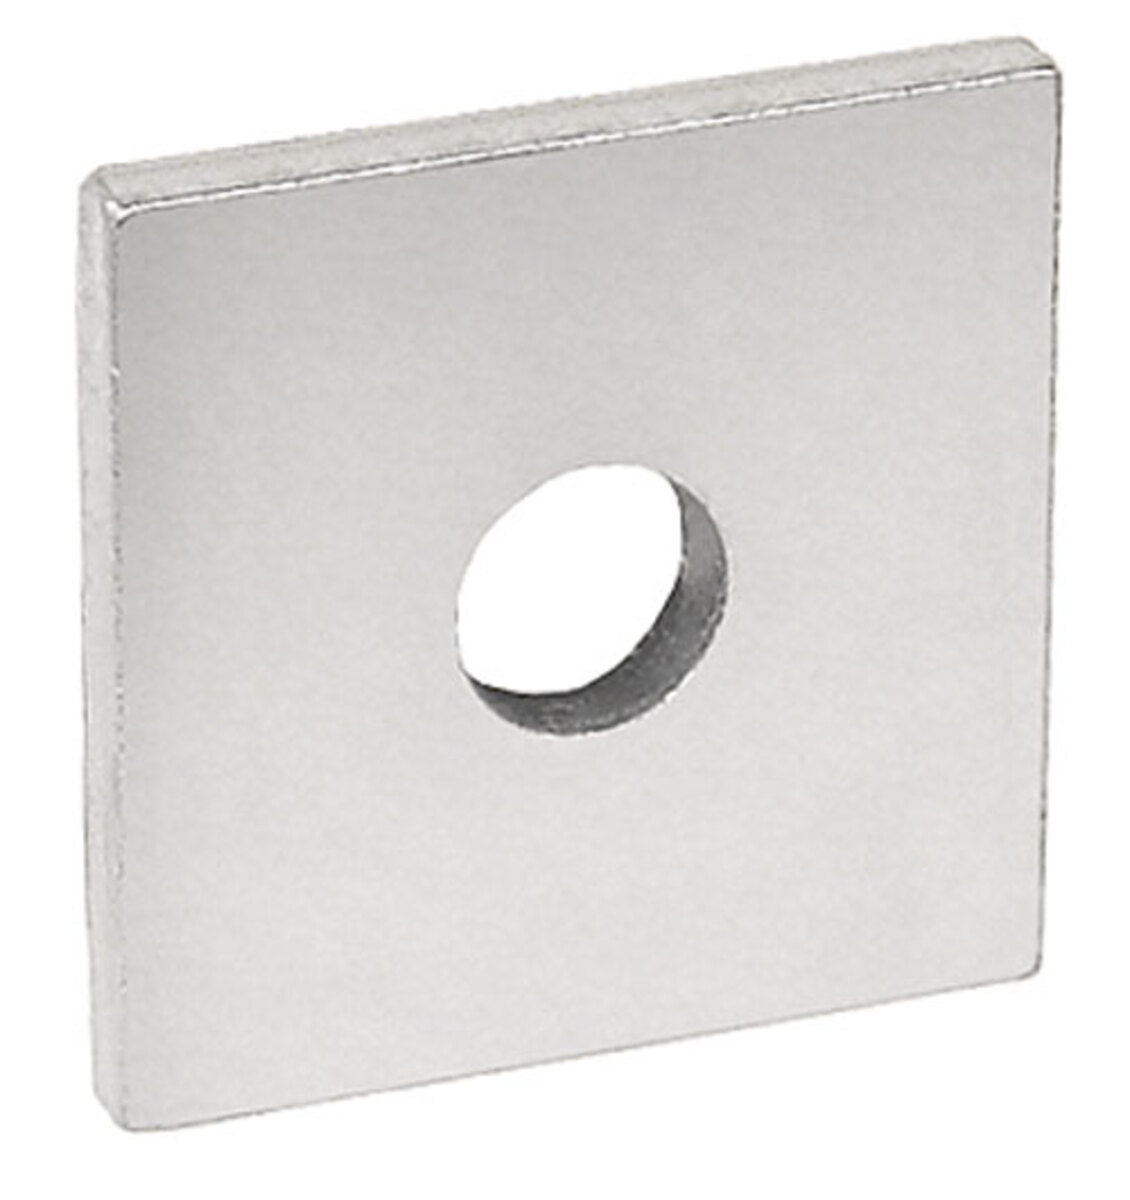 1-5/8 In. Square Strut Washer For 1/2 In. Bolt Zinc Plated Steel